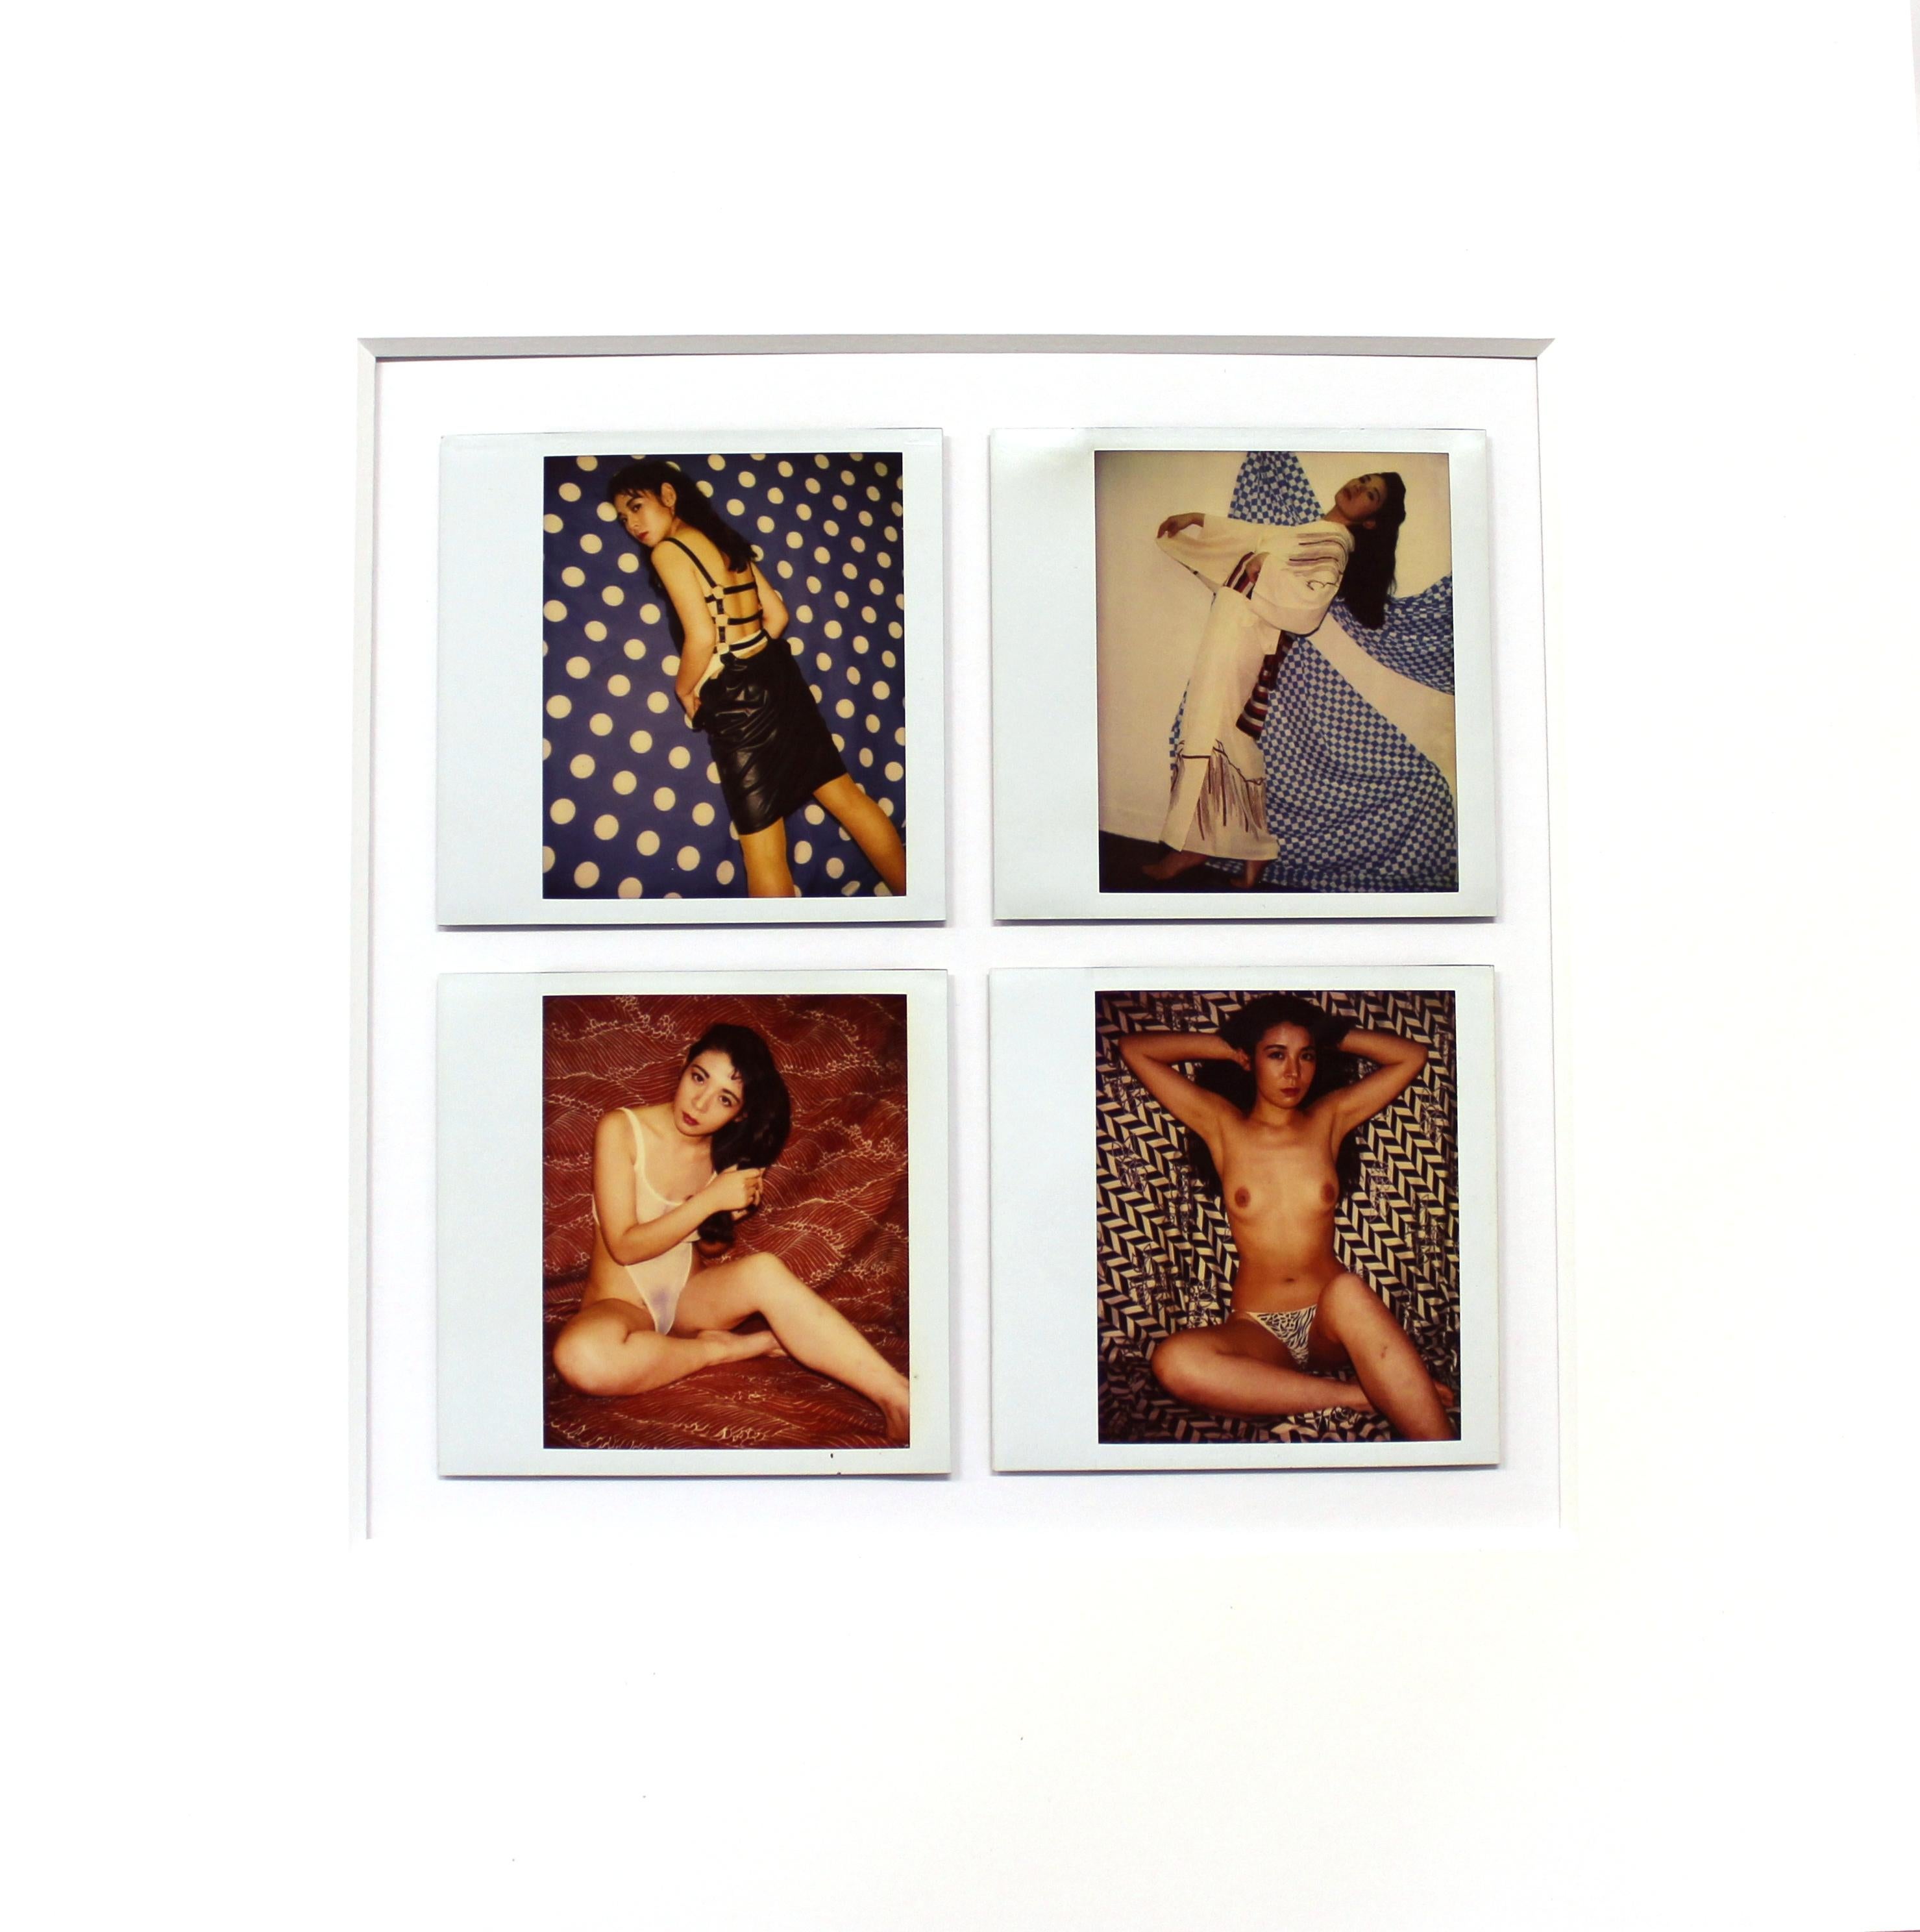 Japanese 1980s Postmodern vernacular erotic and nude Polaroids, unsigned, by an unknown photographer, in the style of Nobuyoshi Araki. The Polaroids are grouped in sets of four on unframed matte boards. There is a total of 22 sets, each at an